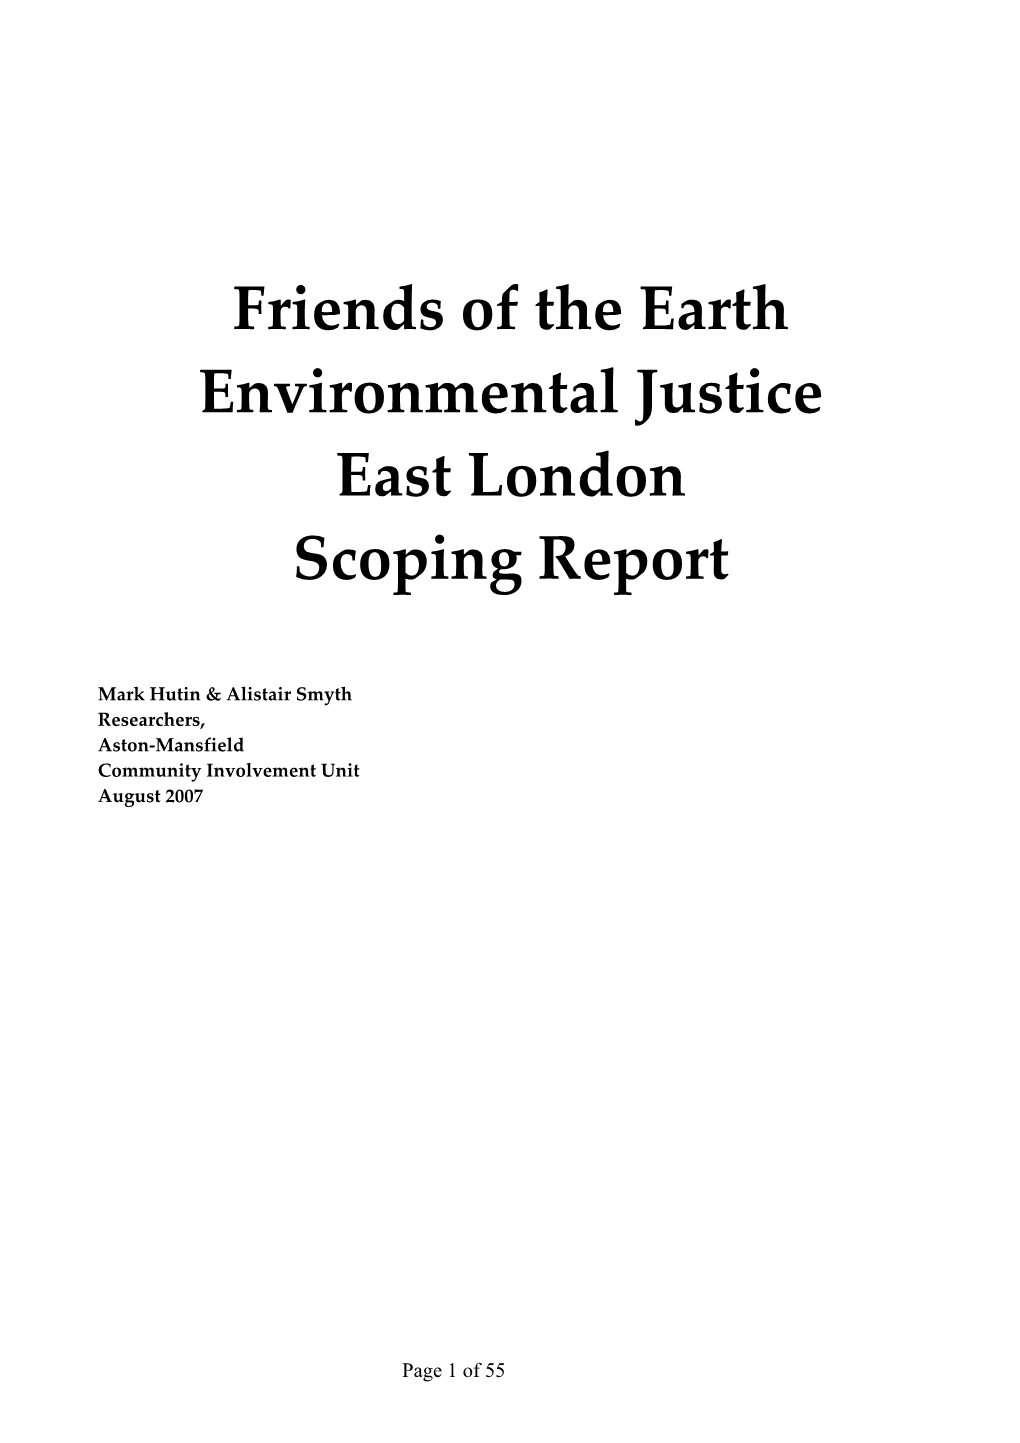 Friends of the Earth Environmental Justice East London Scoping Report